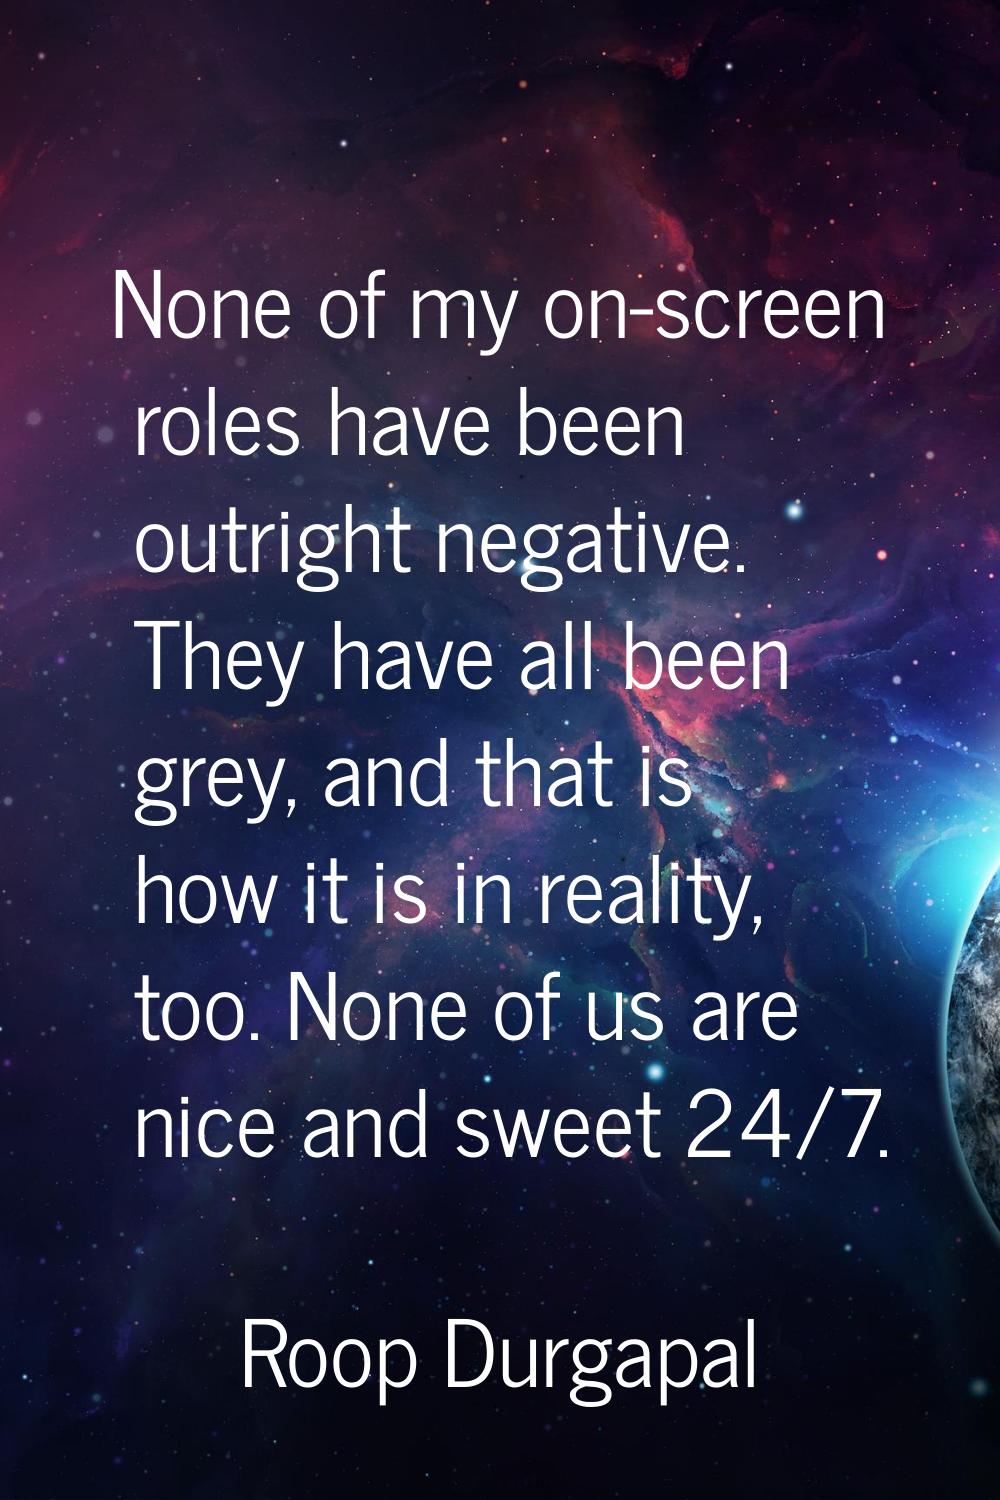 None of my on-screen roles have been outright negative. They have all been grey, and that is how it